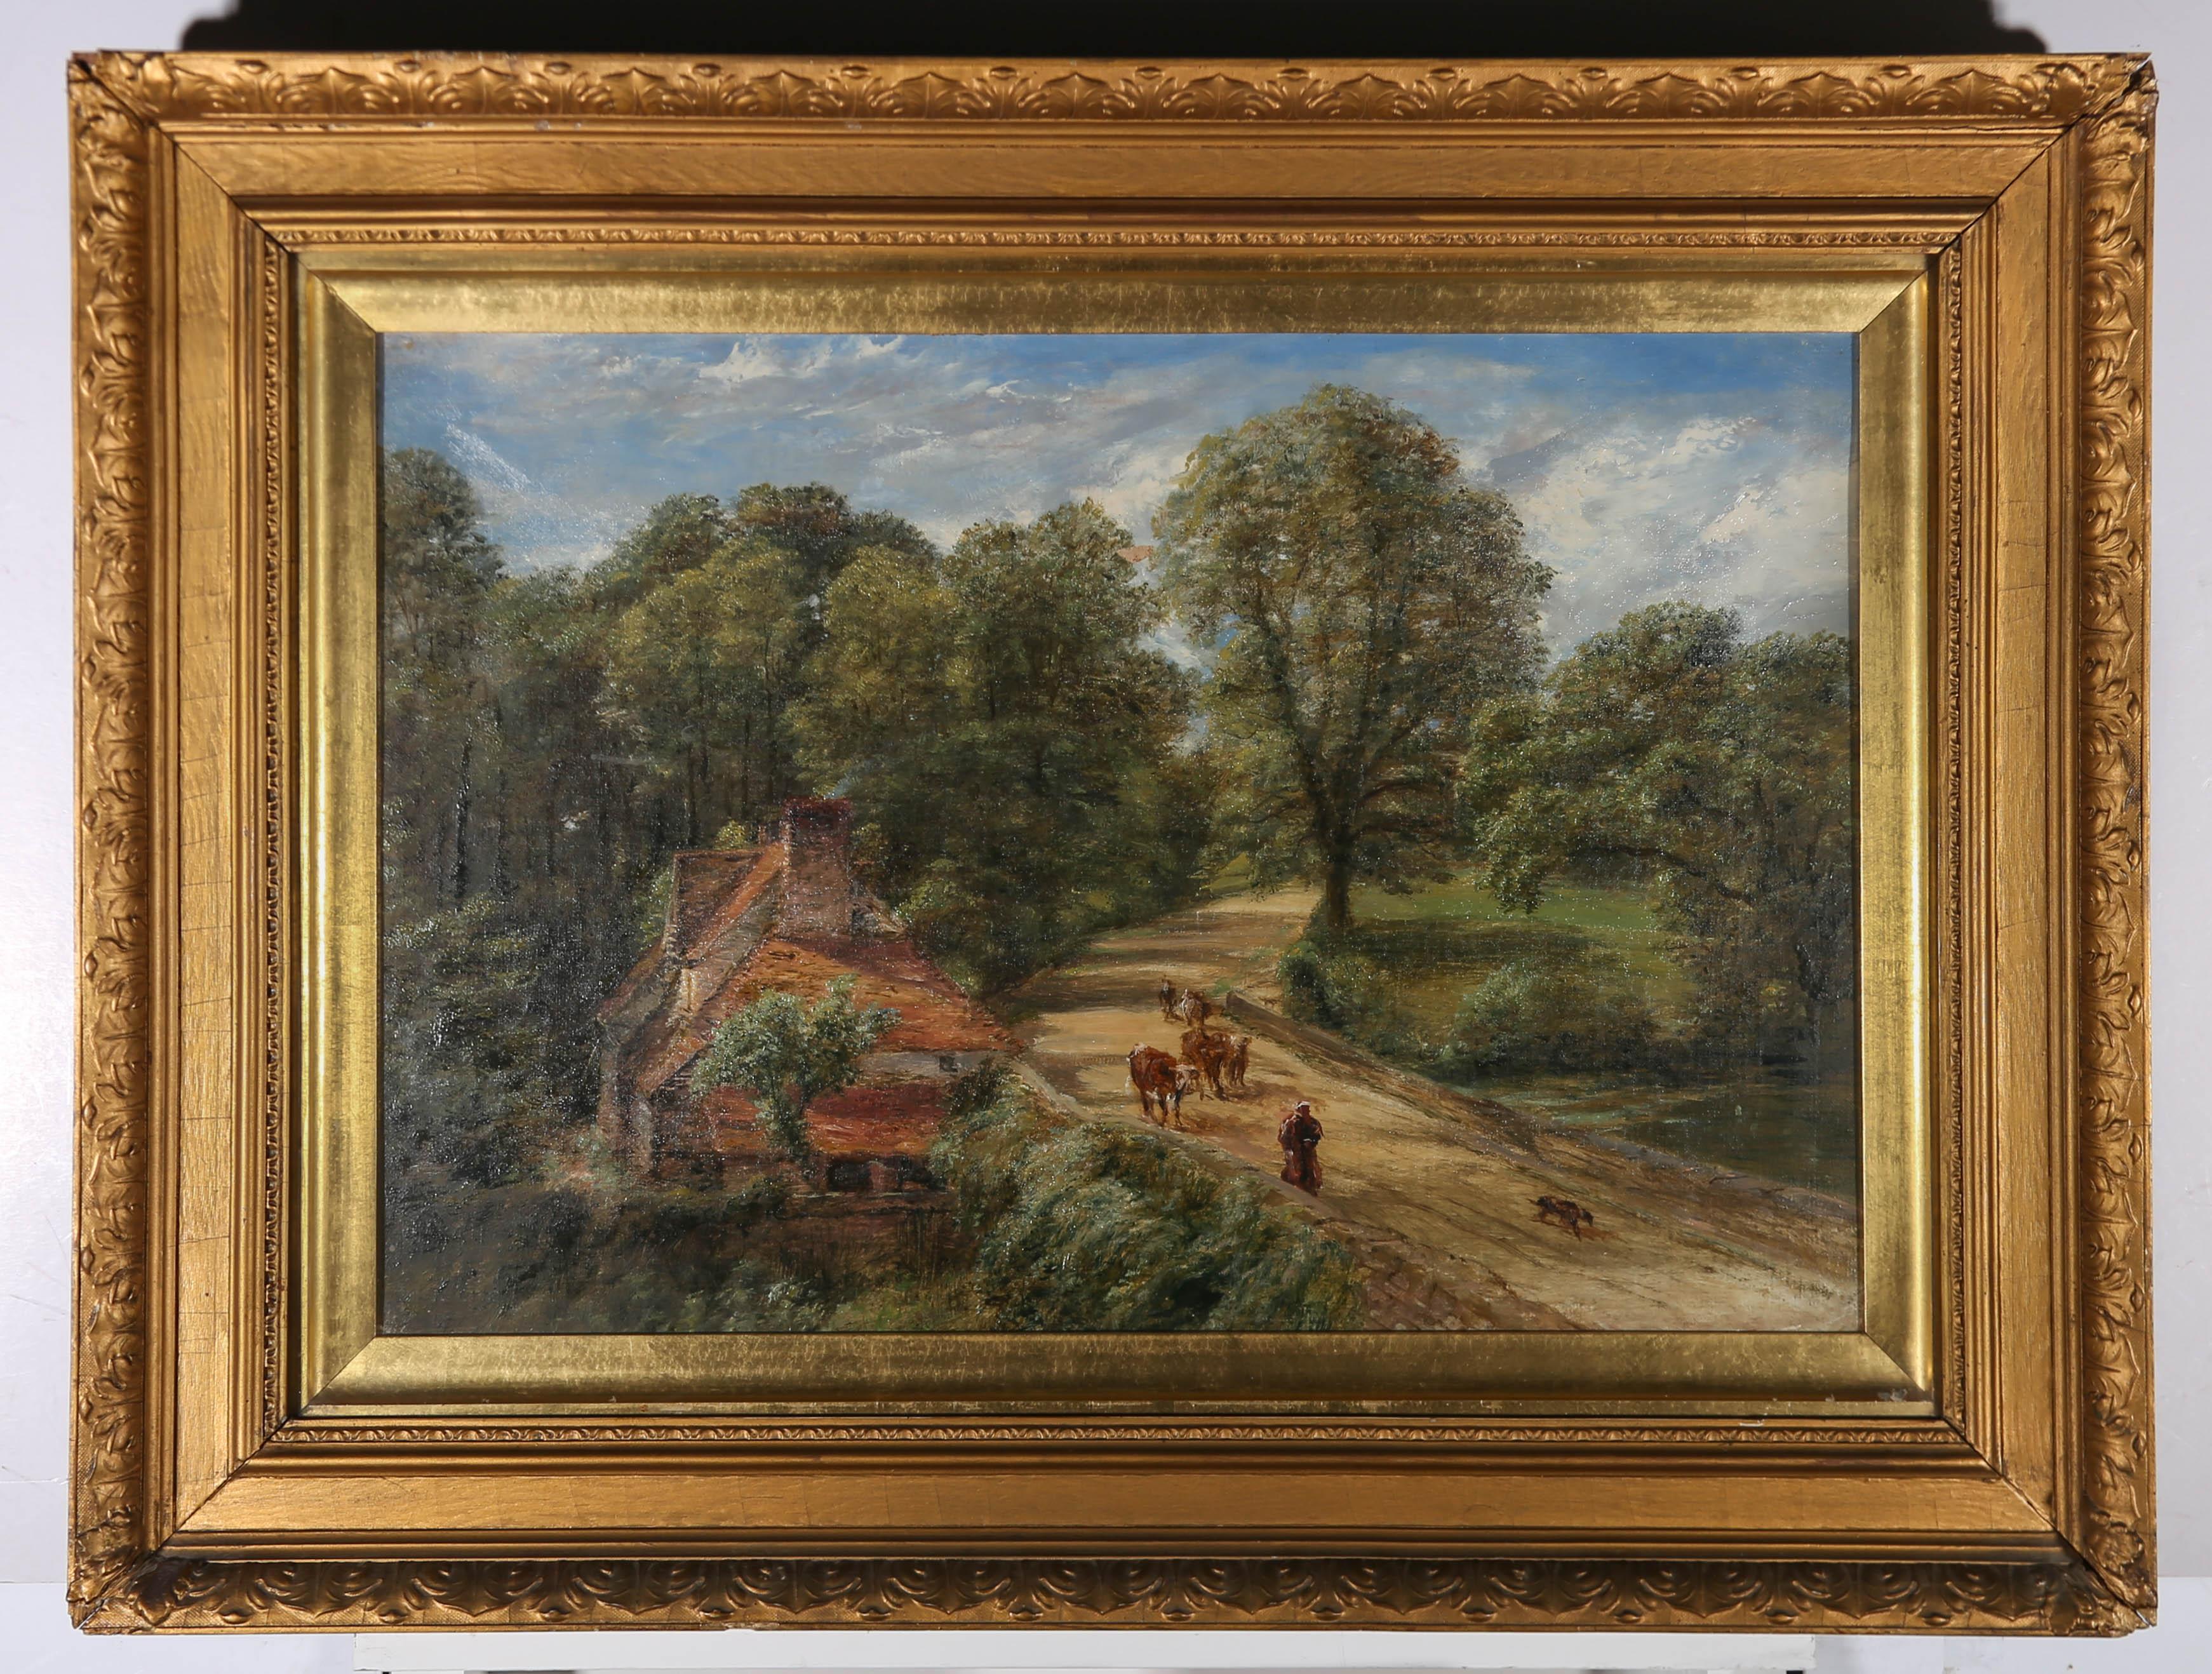 A bucolic turn of the Century oil landscape showing a man leading his small herd of cattle with his dog over a stone bridge. A house is nestled in the lush greenery of a wood to the left and a verdant meadow lies to the right. The sky overhead is a